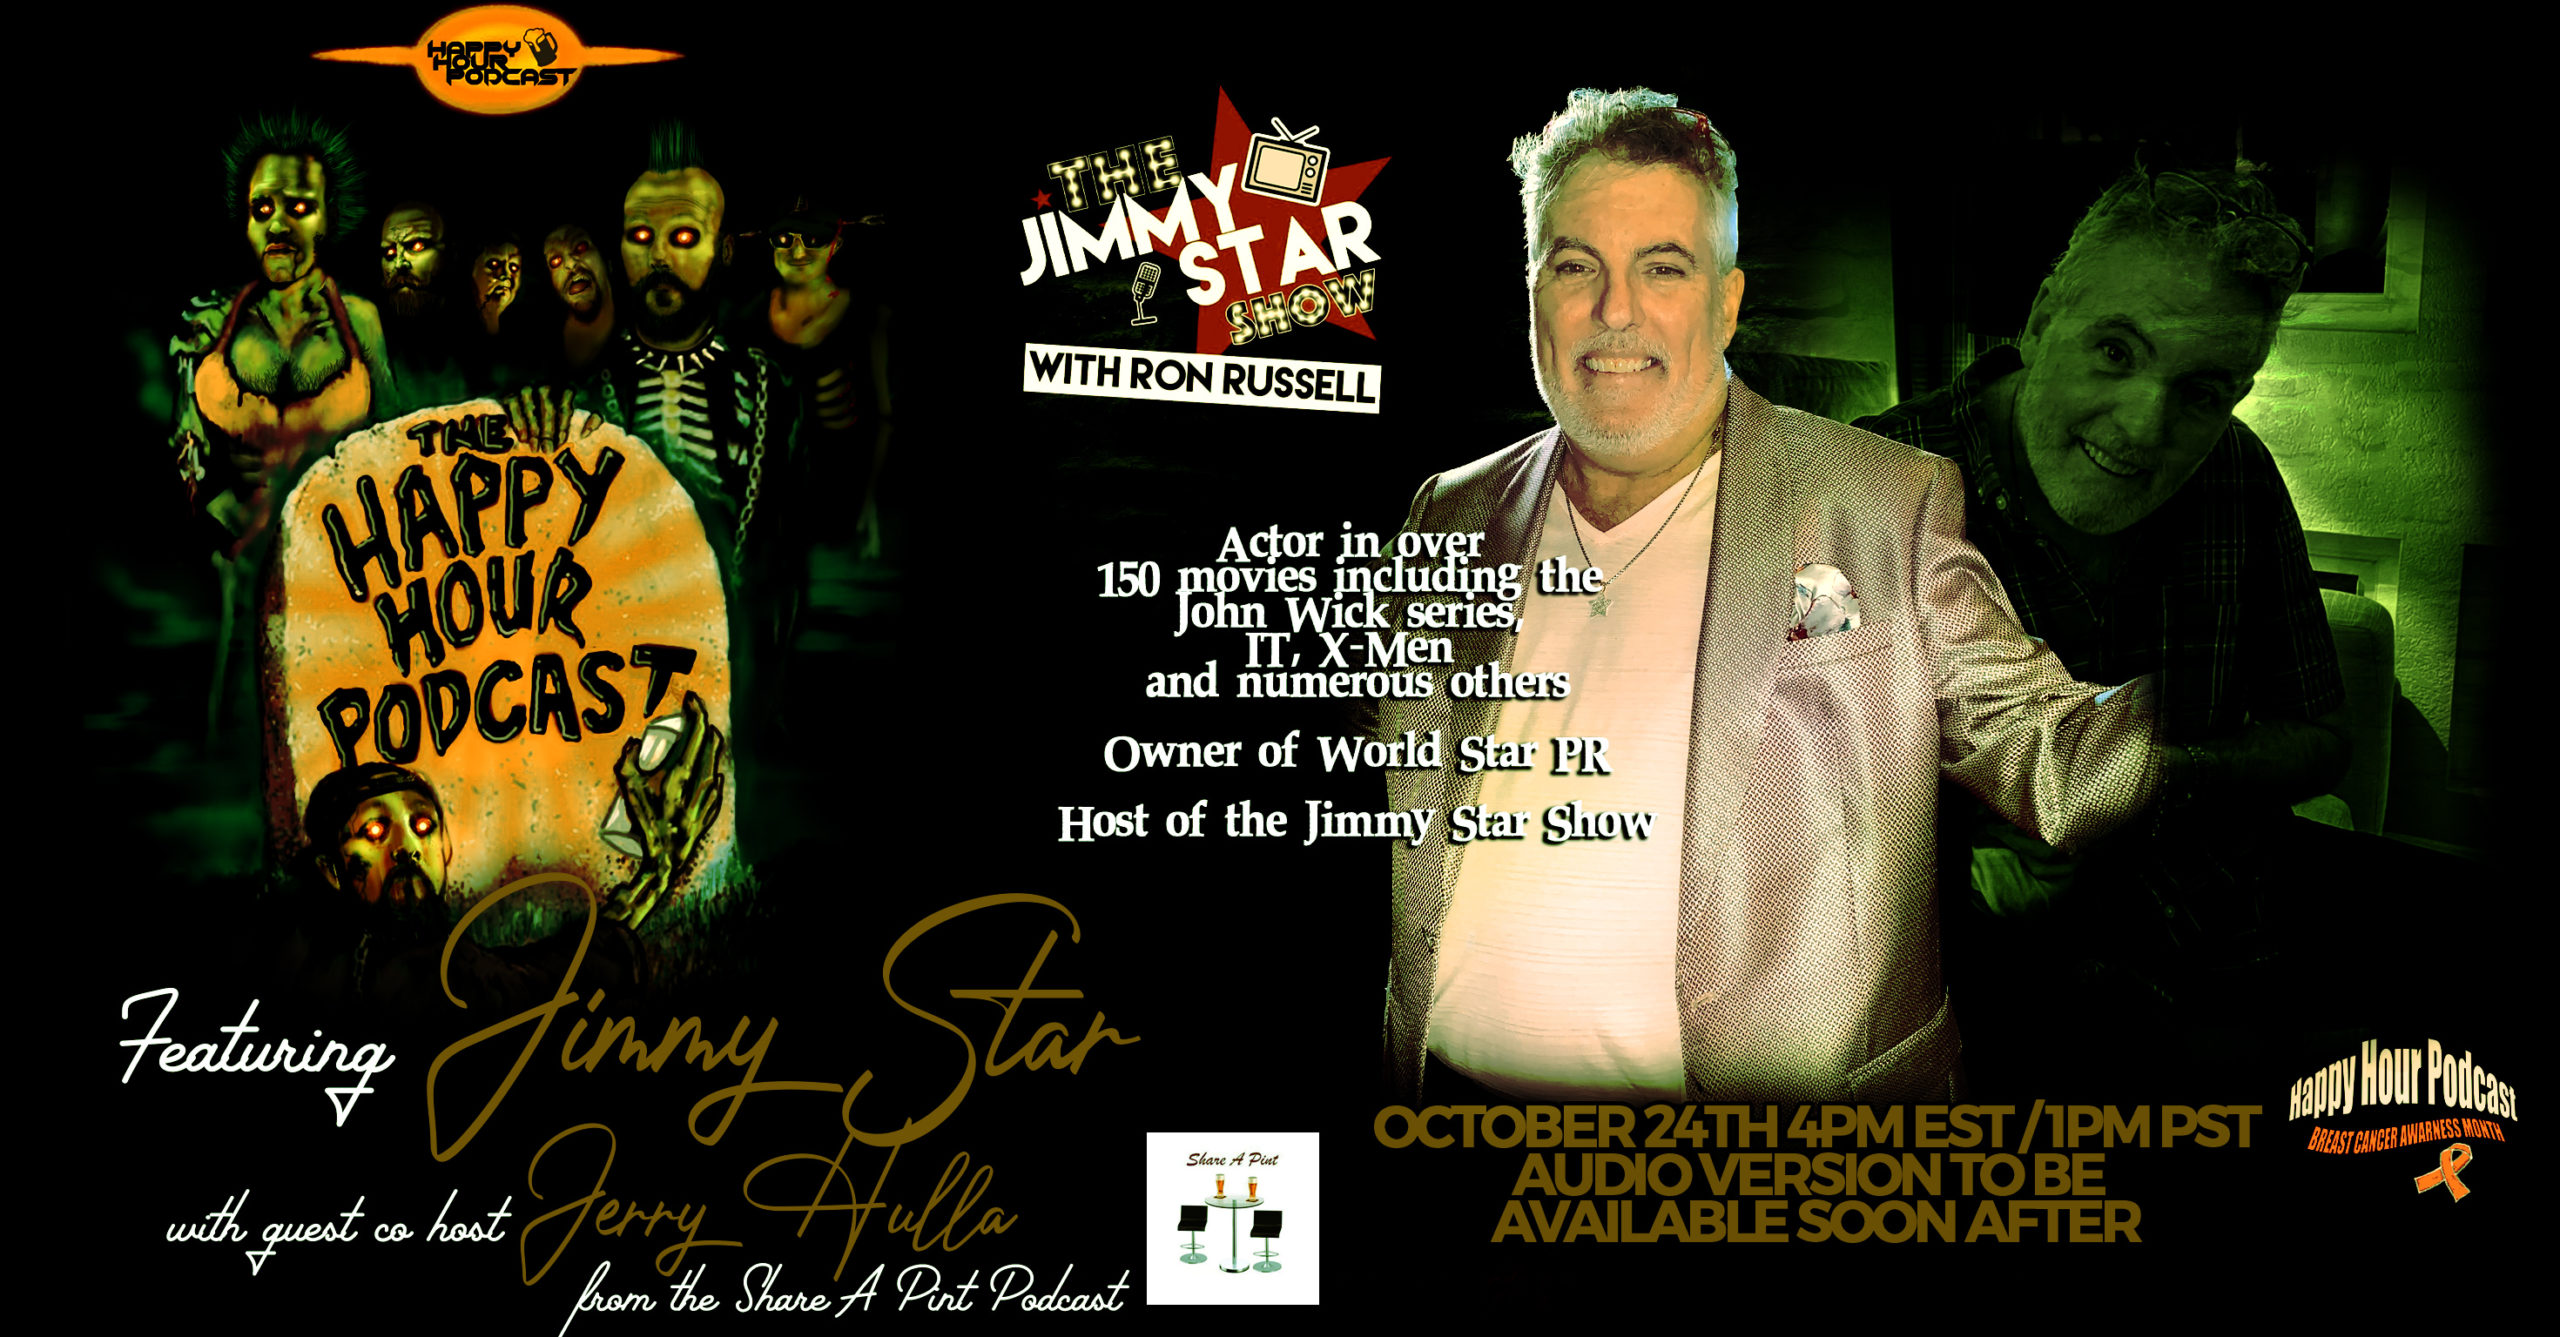 Featuring Jimmy Star